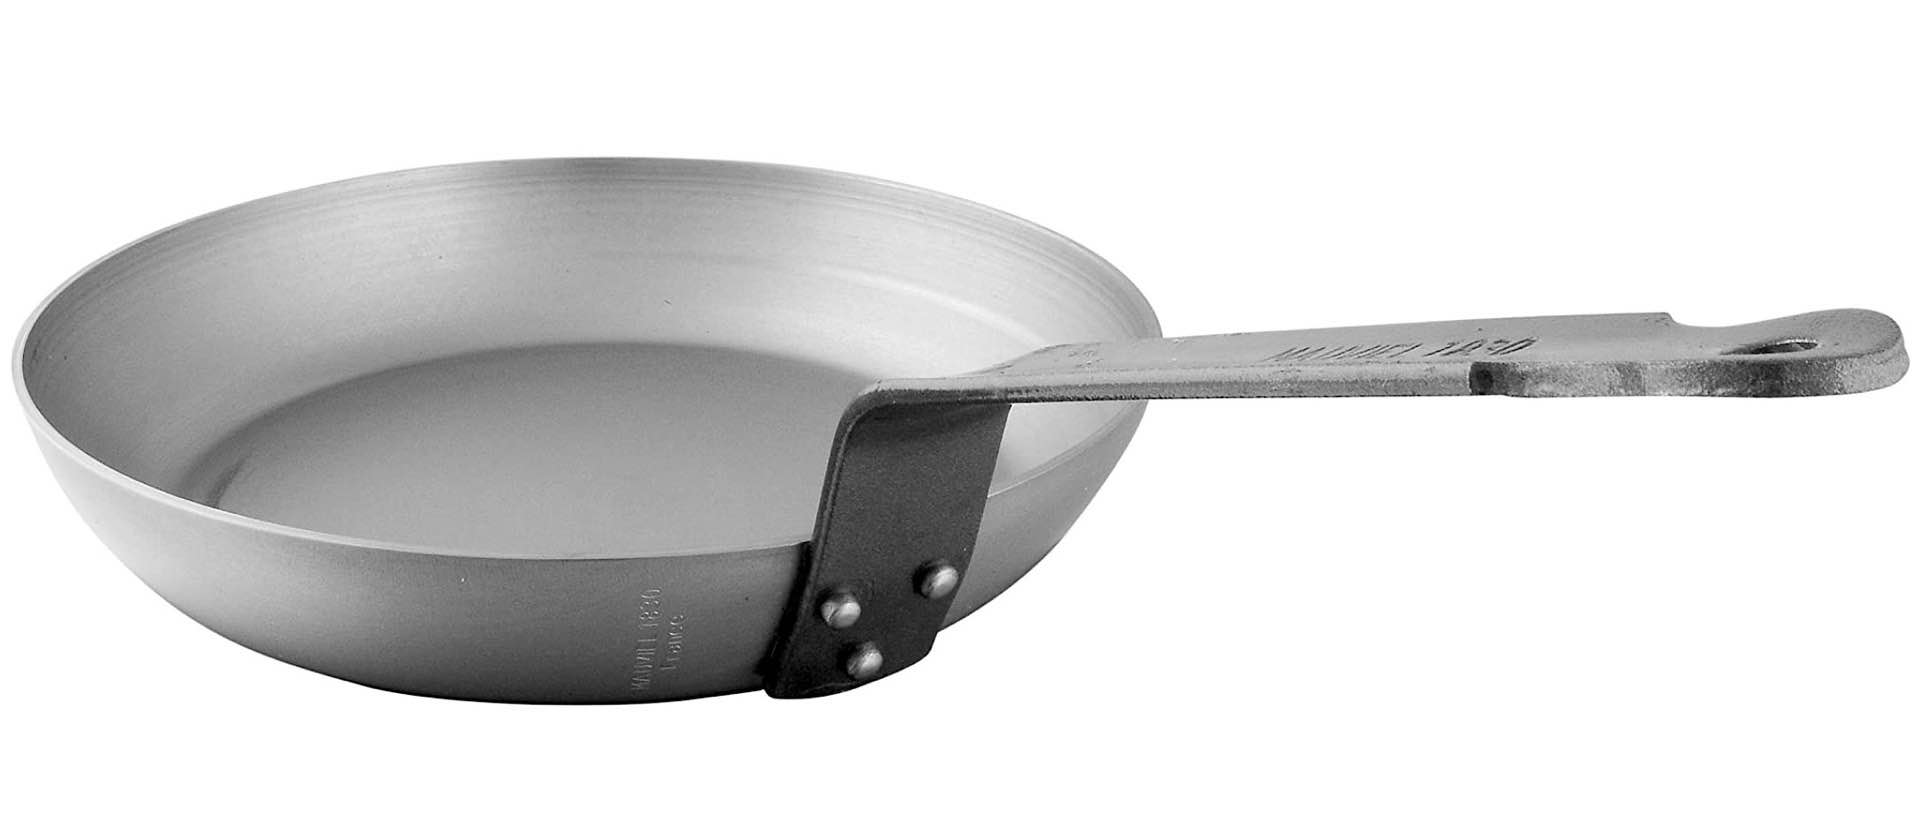 The Mauviel M’Steel carbon steel skillet. ($70–$100, depending on size)